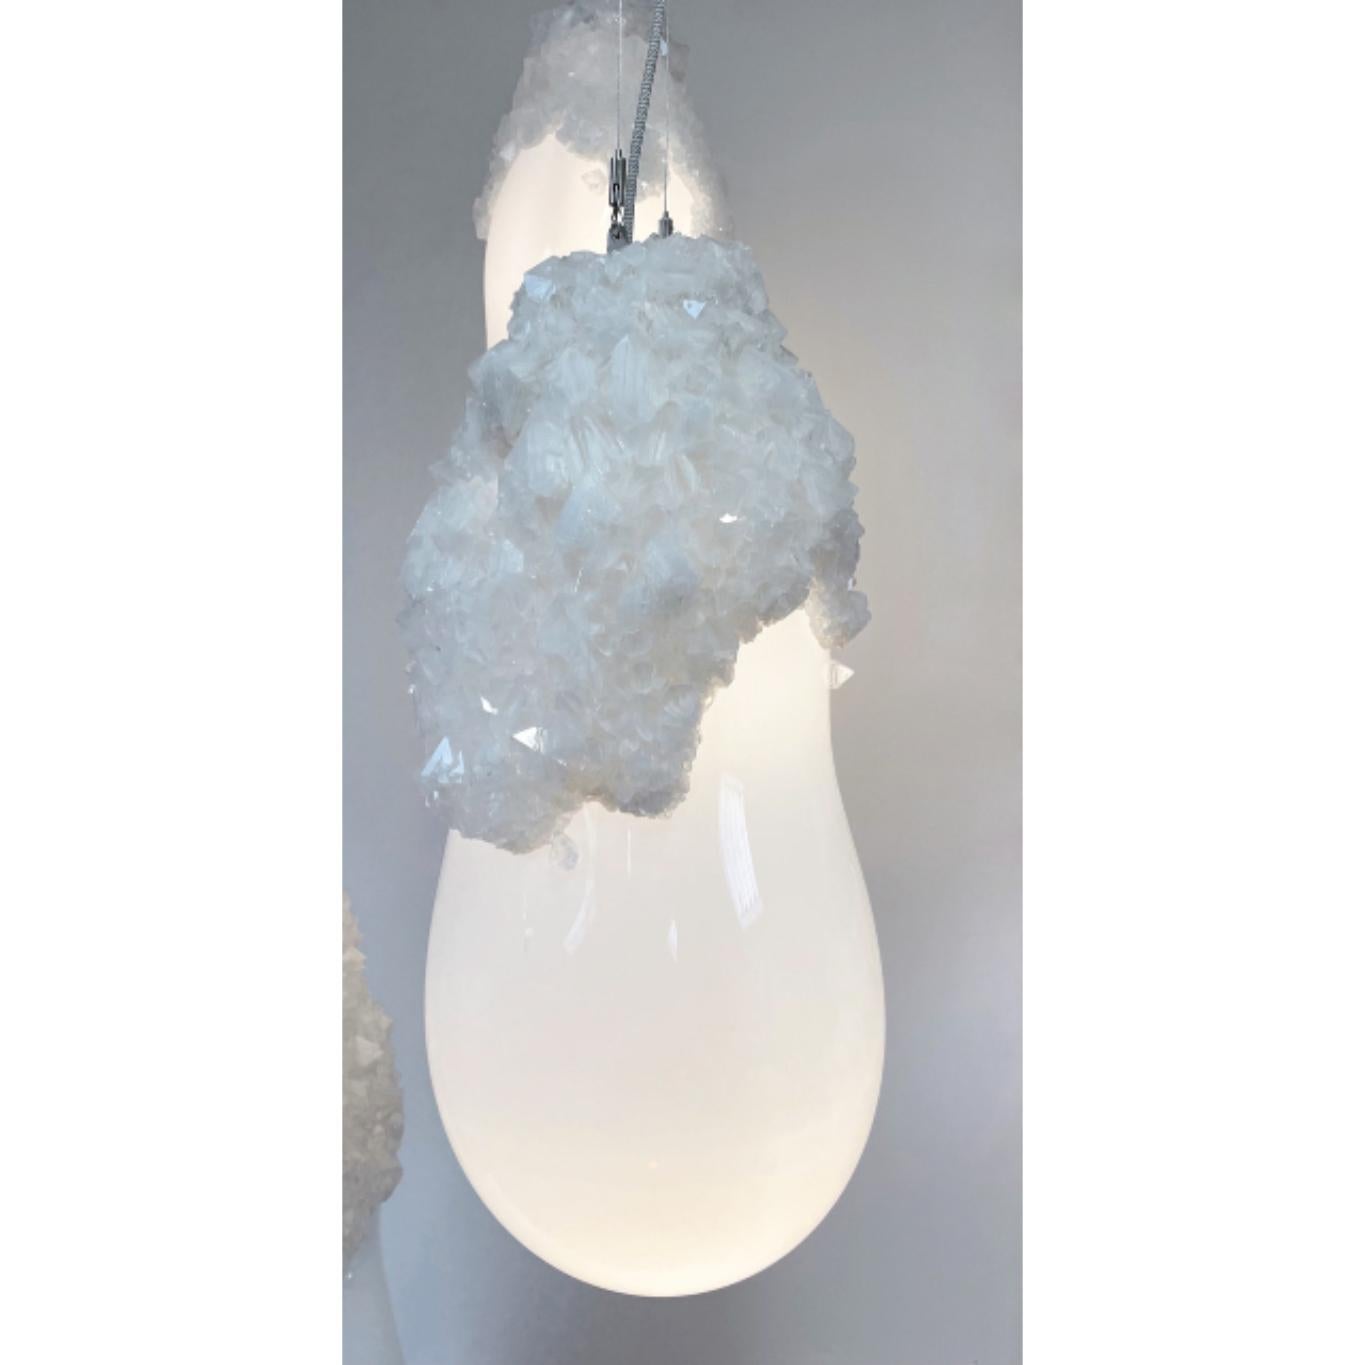 Medium overgrown bubbles by Mark Sturkenboom and Alex de Witte
Dimensions: 70 cm
Material: Mouthblown glass, natural grown crystal, dimmable led, Color White or grey black
Ceiling ornaments can be produced in crystal to extend the Overgrown